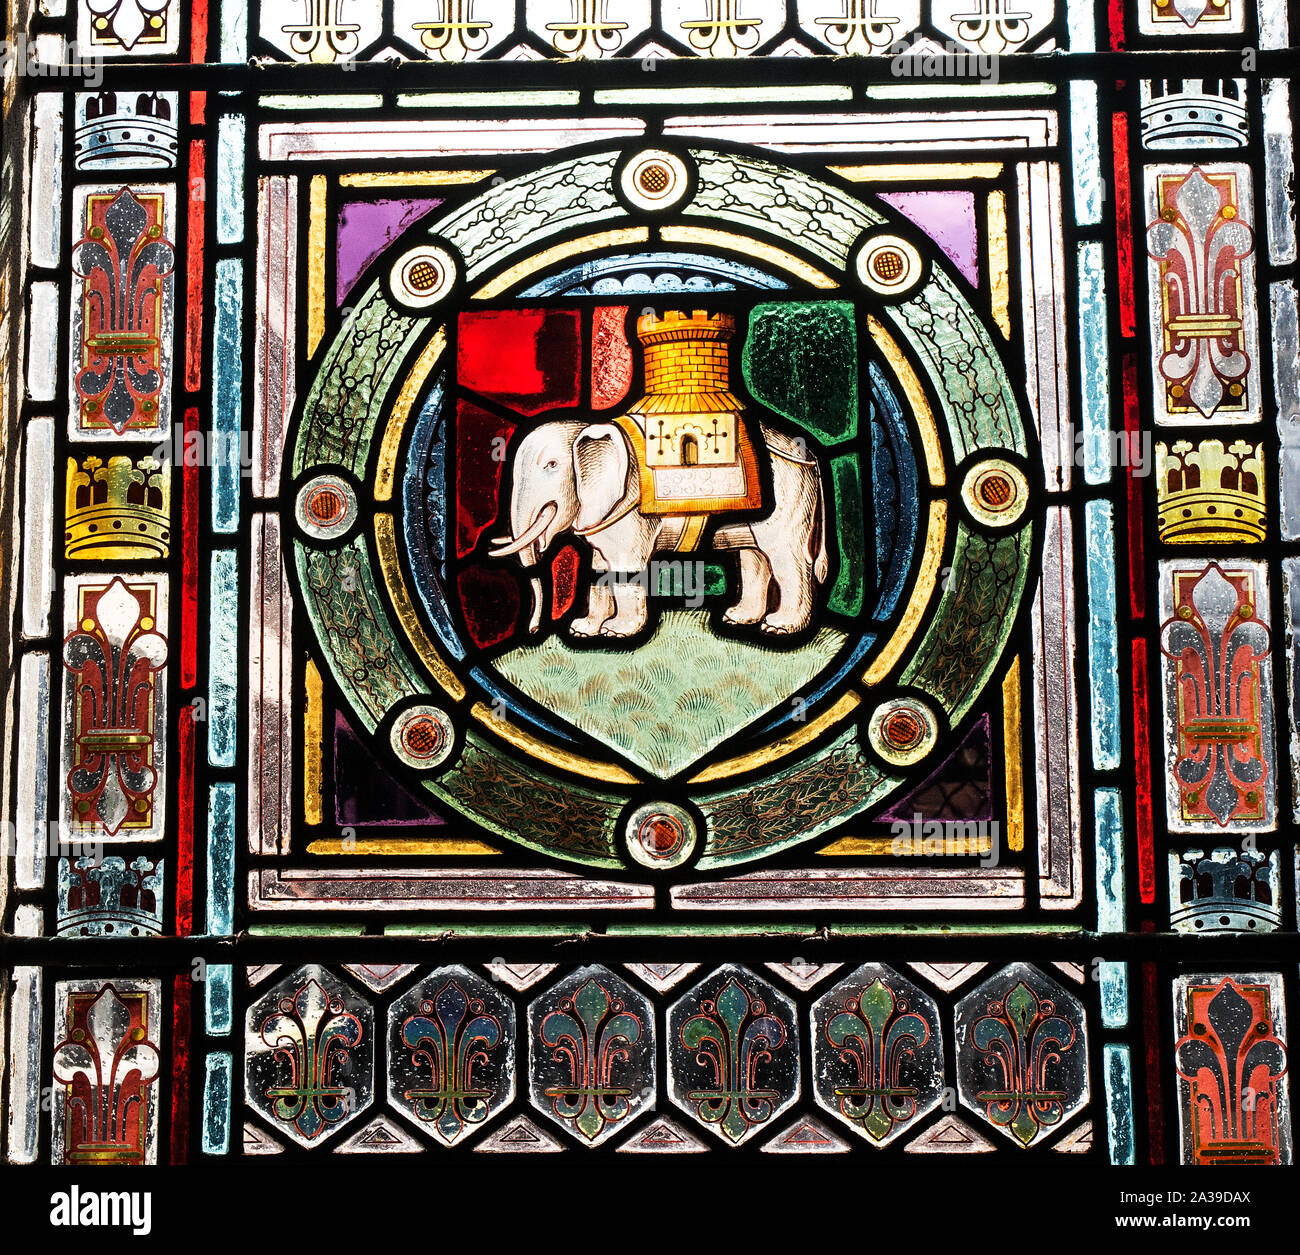 Coat of Arms of Coventry on stained glass window in The Draper's Room, St.Mary's Guildhall, Coventry Stock Photo